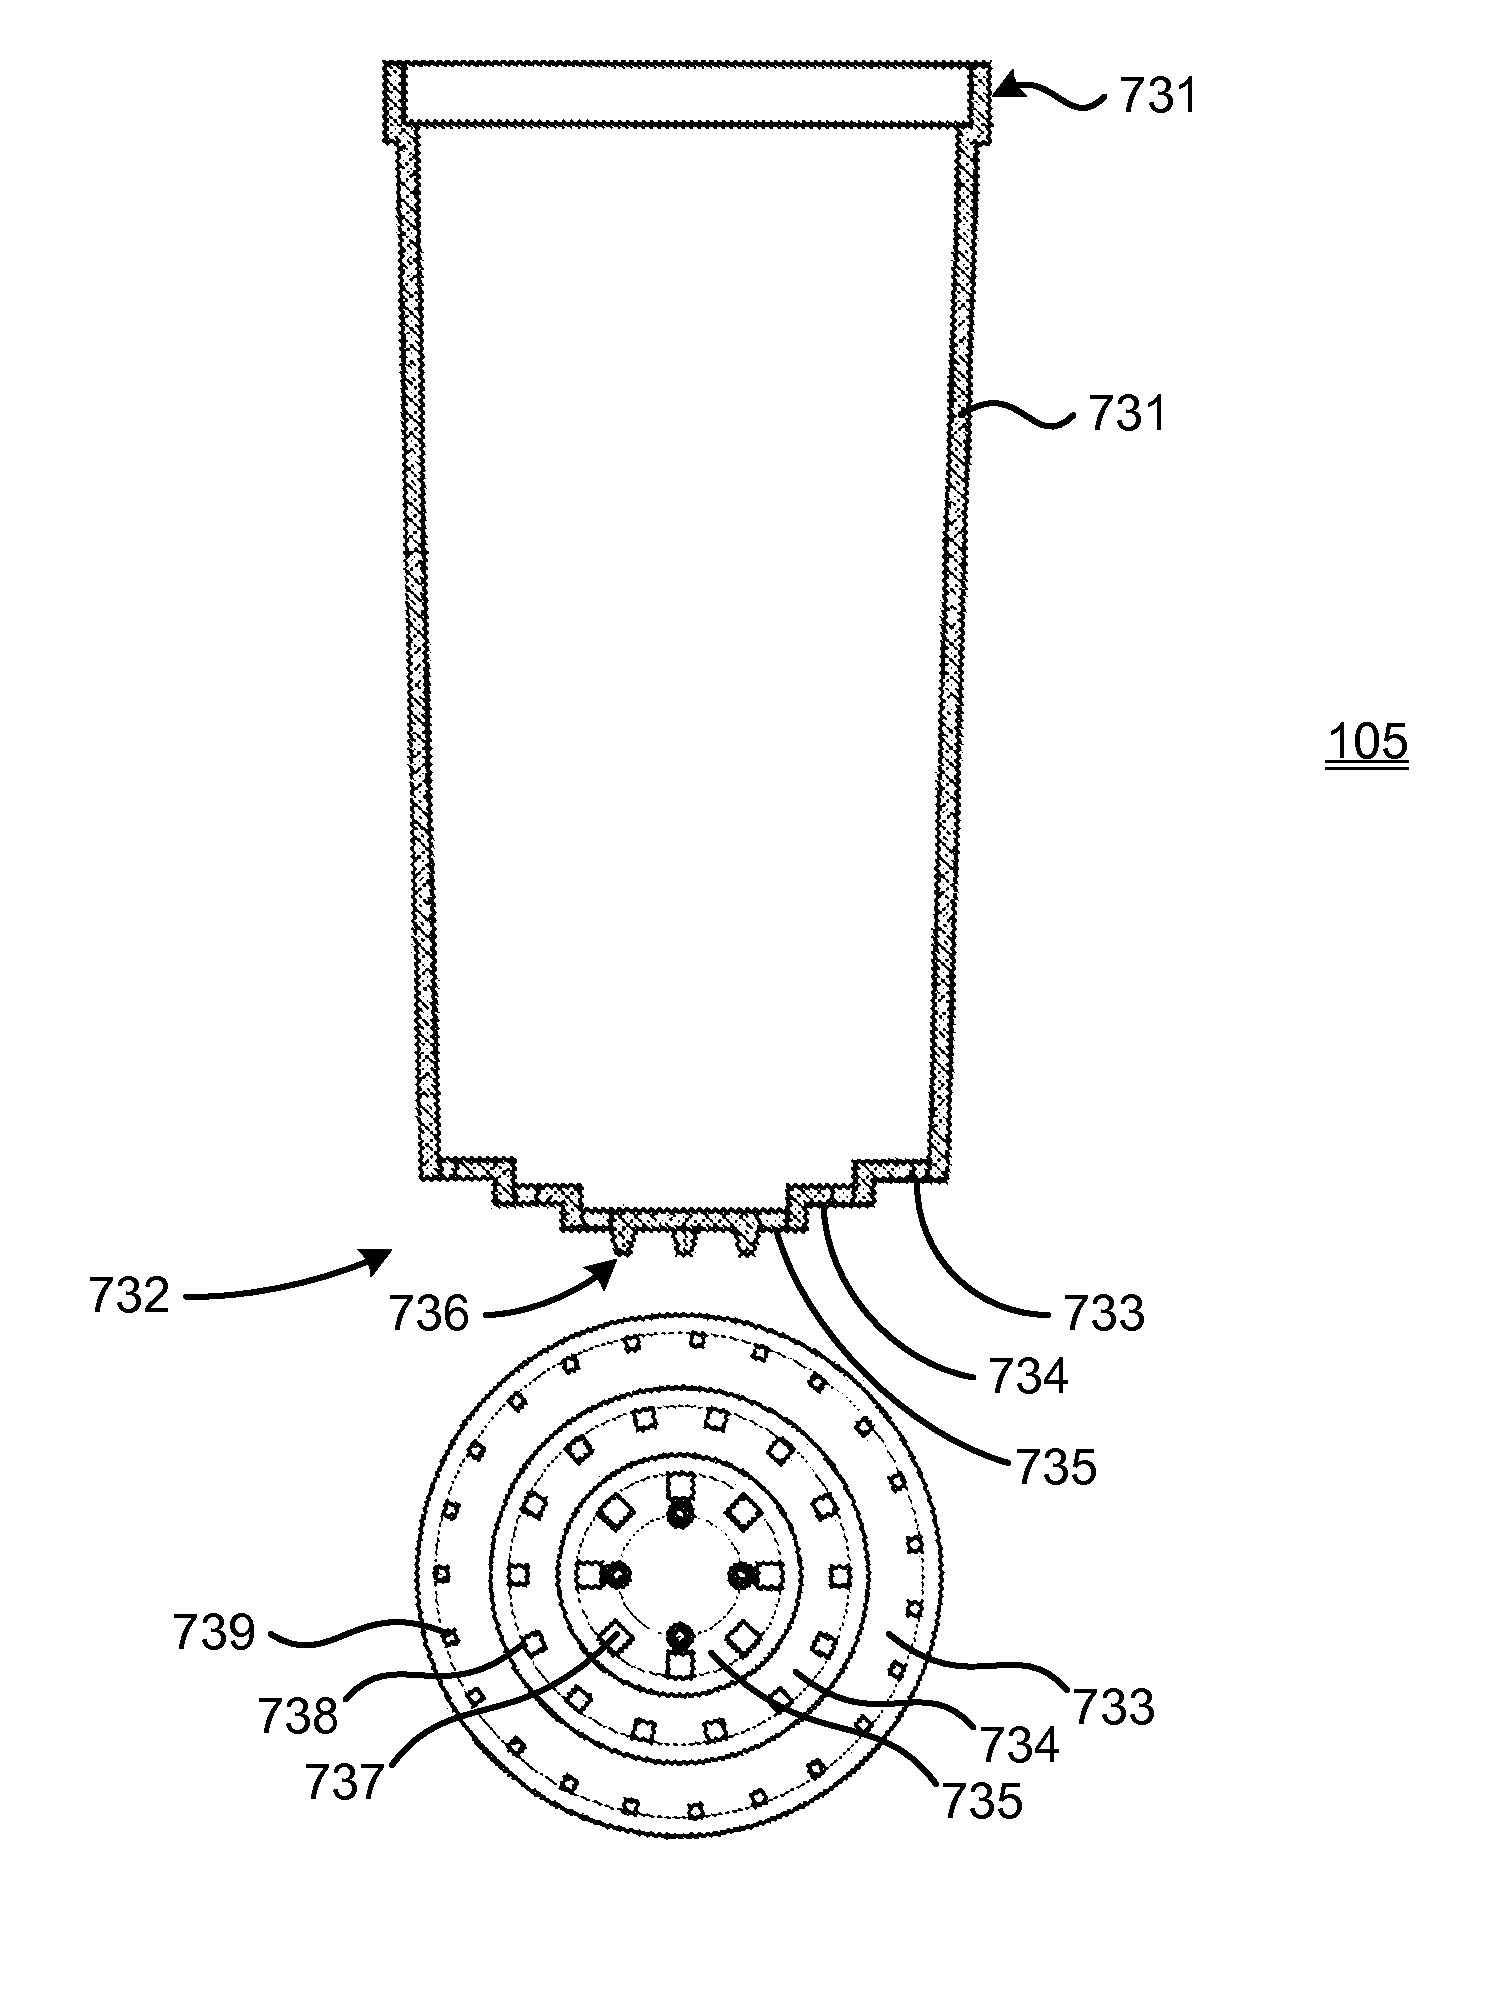 Device for diaphragmal resistive breathing training